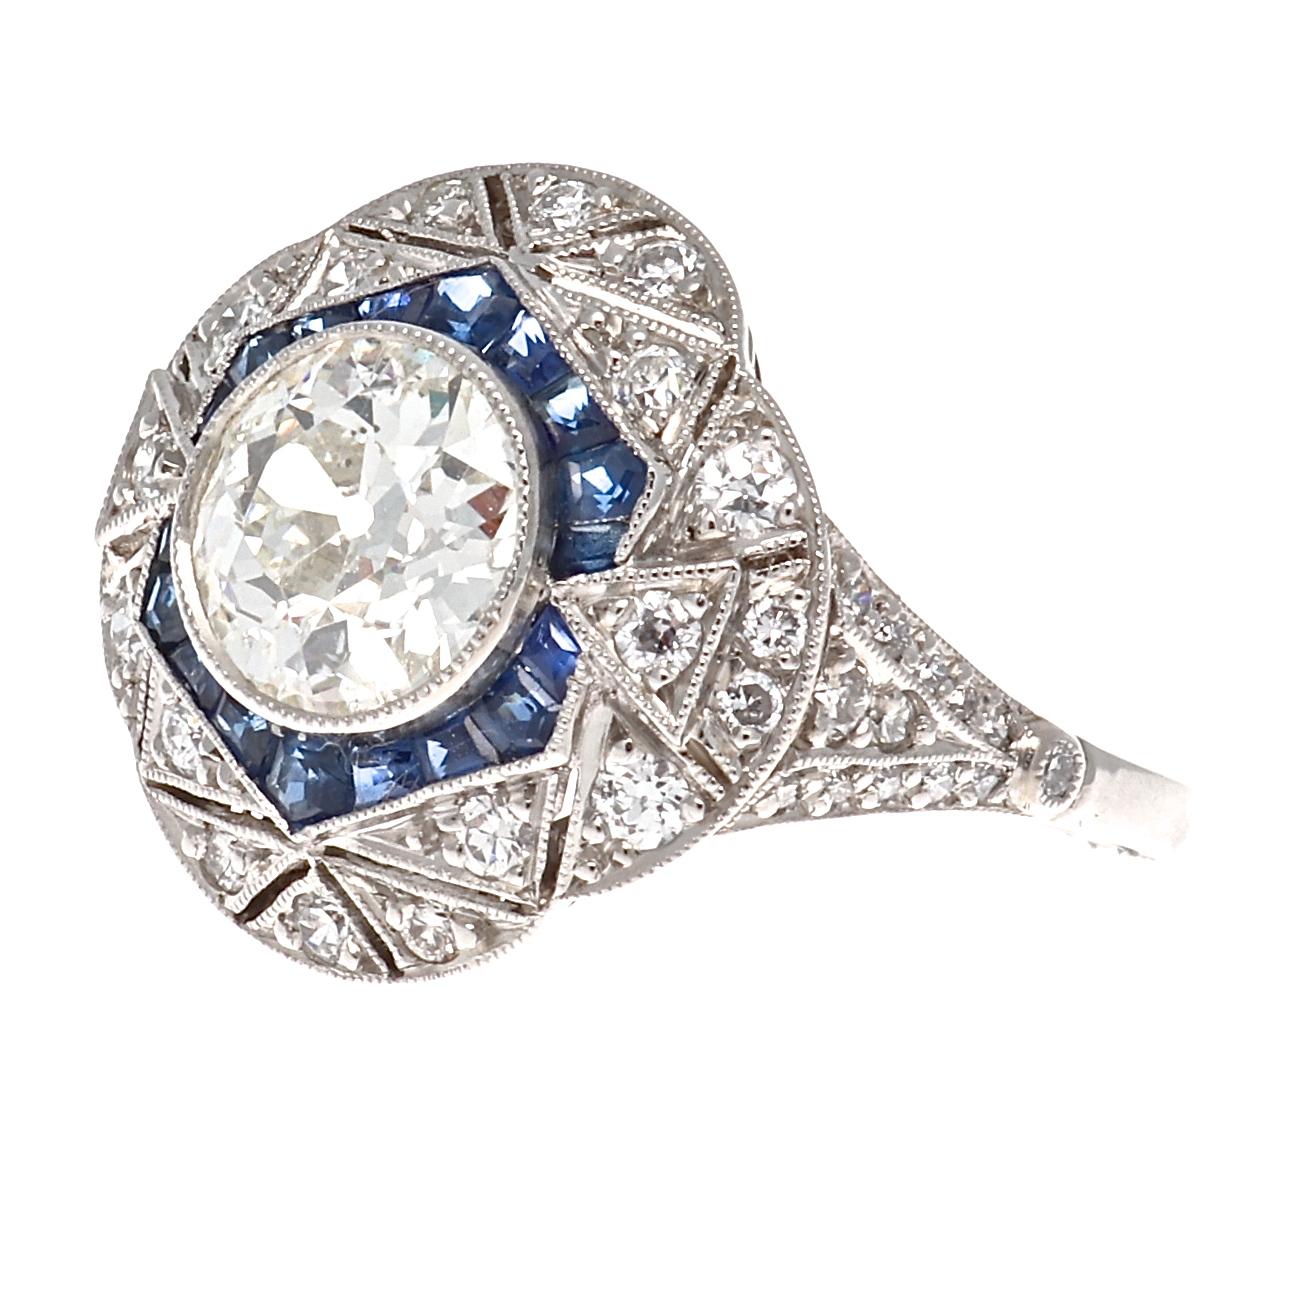 Inspired by the Golden era of jewelry this ring features symmetry and design, two key components of Art Deco masterpieces. Featuring a 1.33 carat old European cut diamond that is I color, SI1 clarity. Set in a hand crafted platinum ring with royal